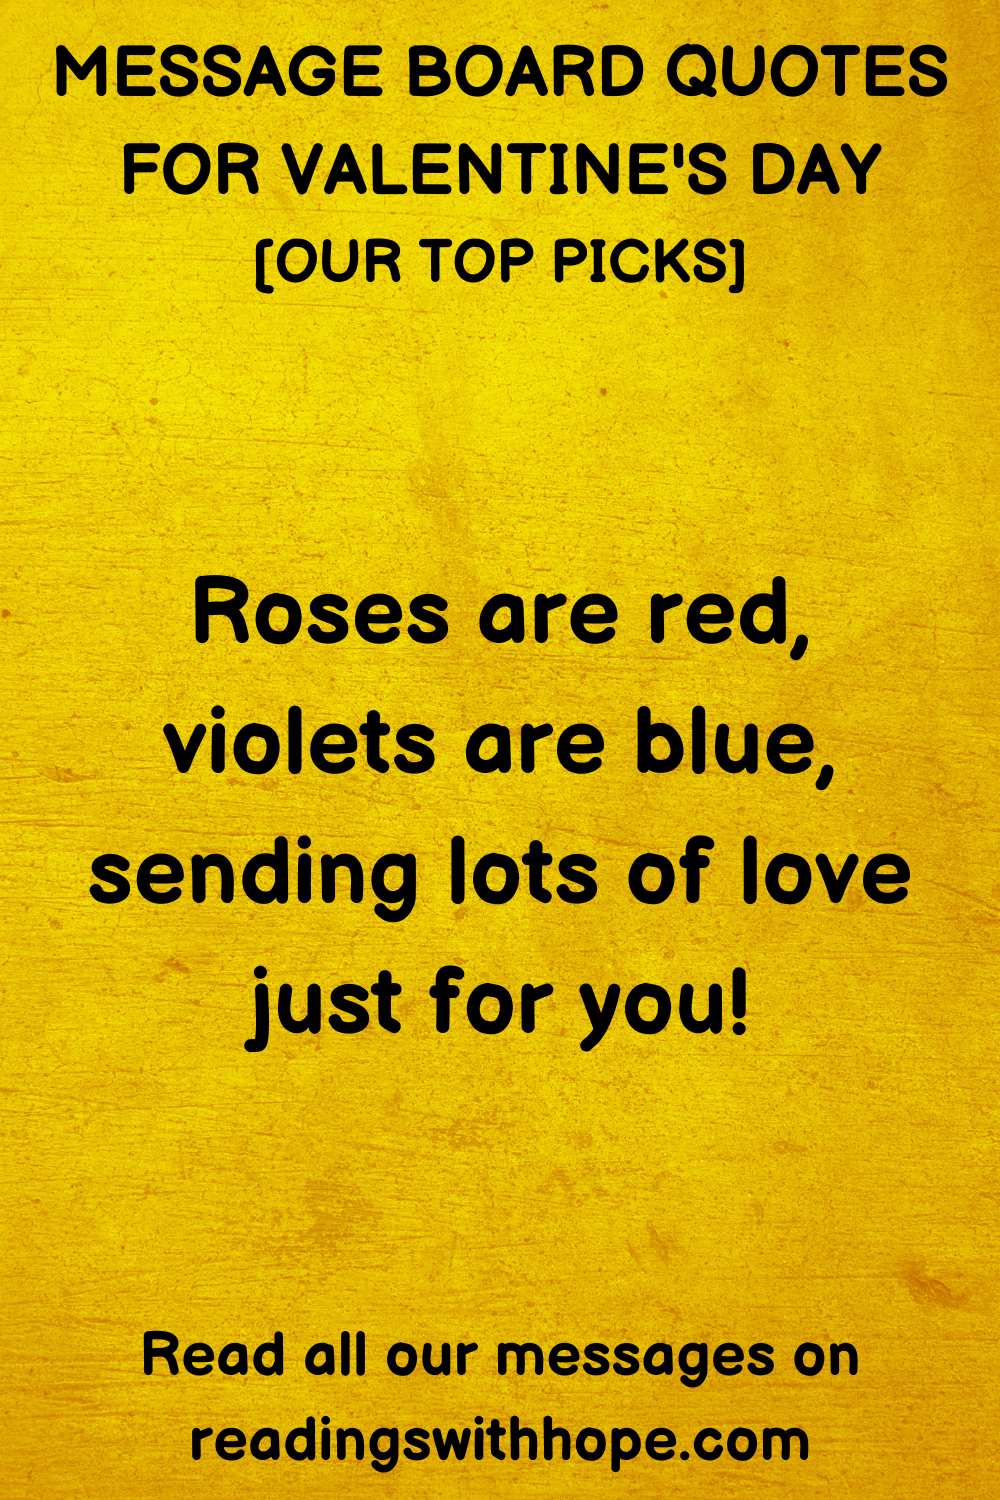 140 Message Board Quotes for Valentine's Day